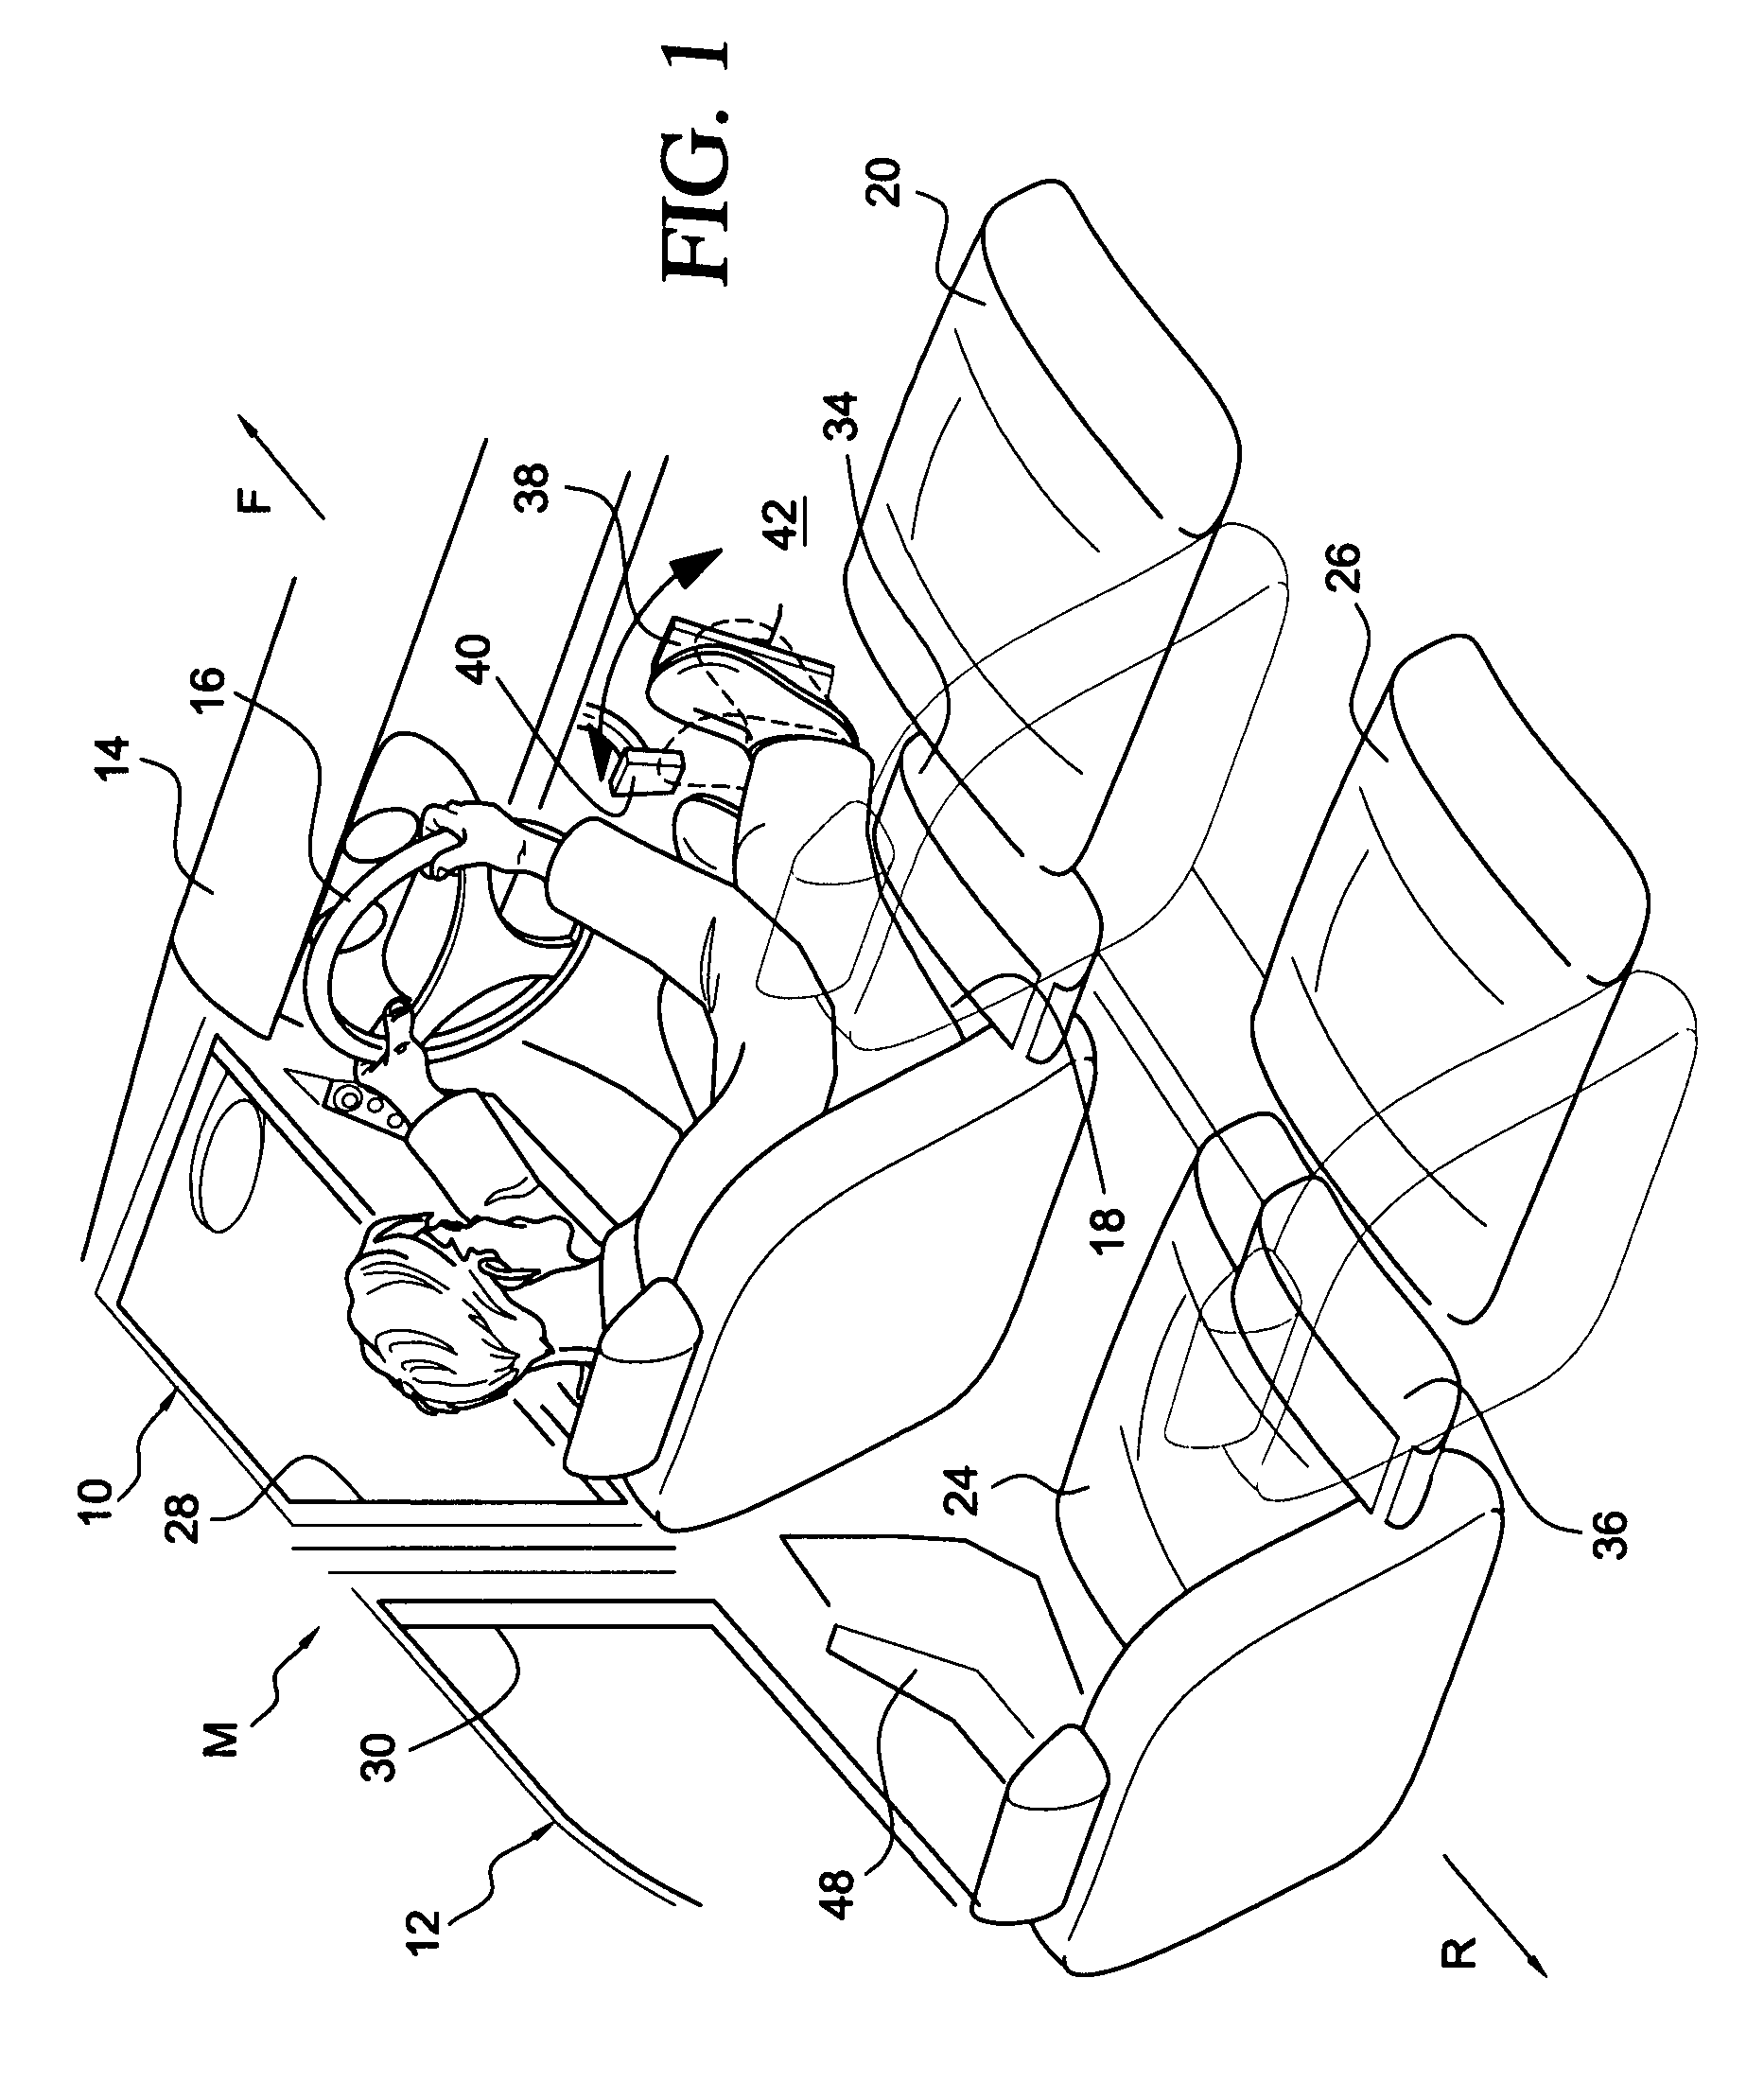 Automobile exercises and method and apparatus for performing the same